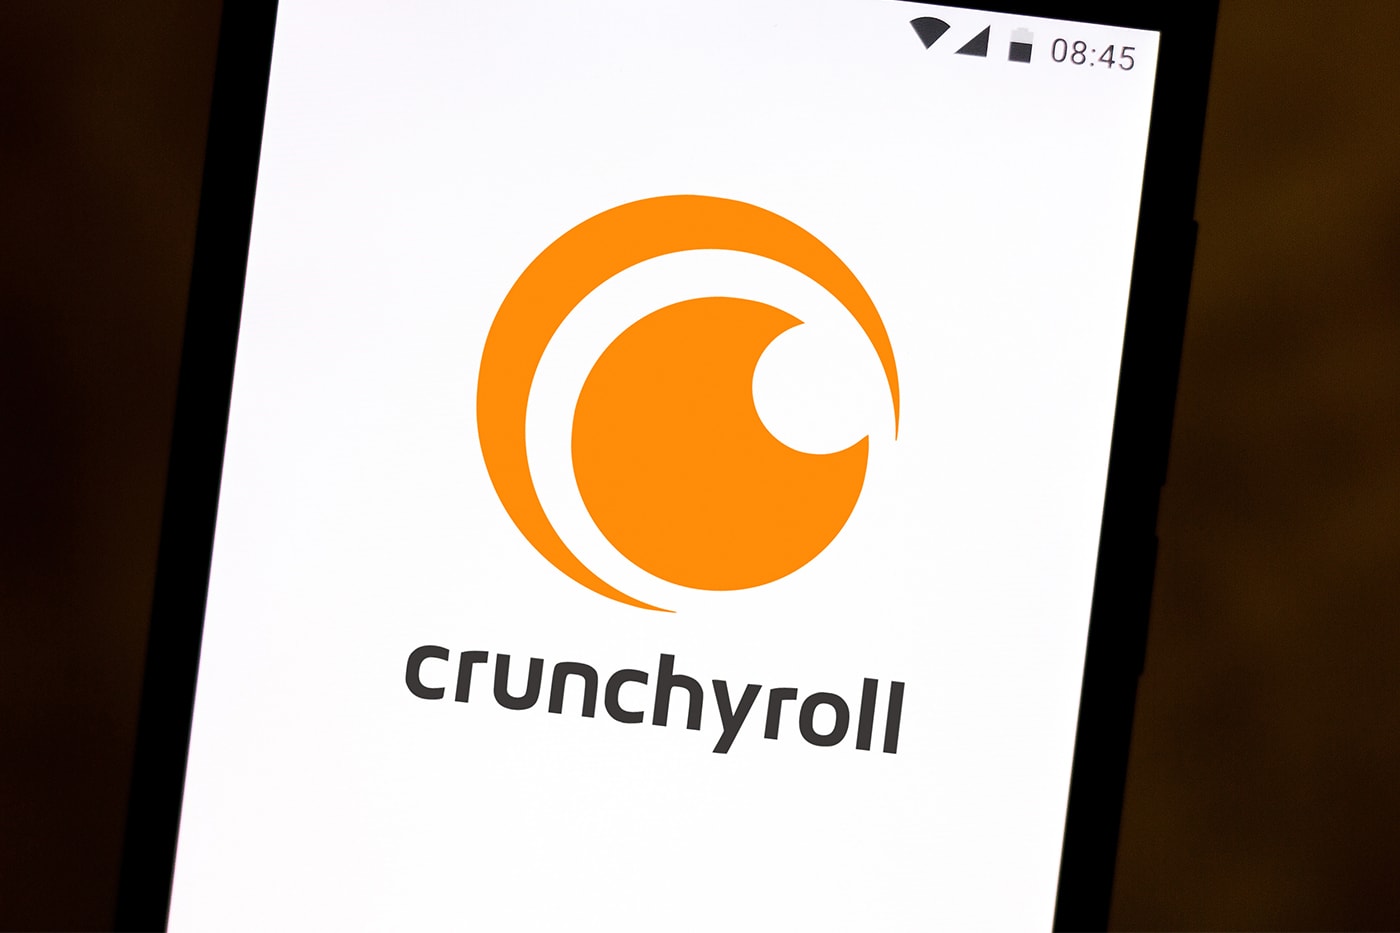 Funimation Vs Crunchyroll: Which Is Better?